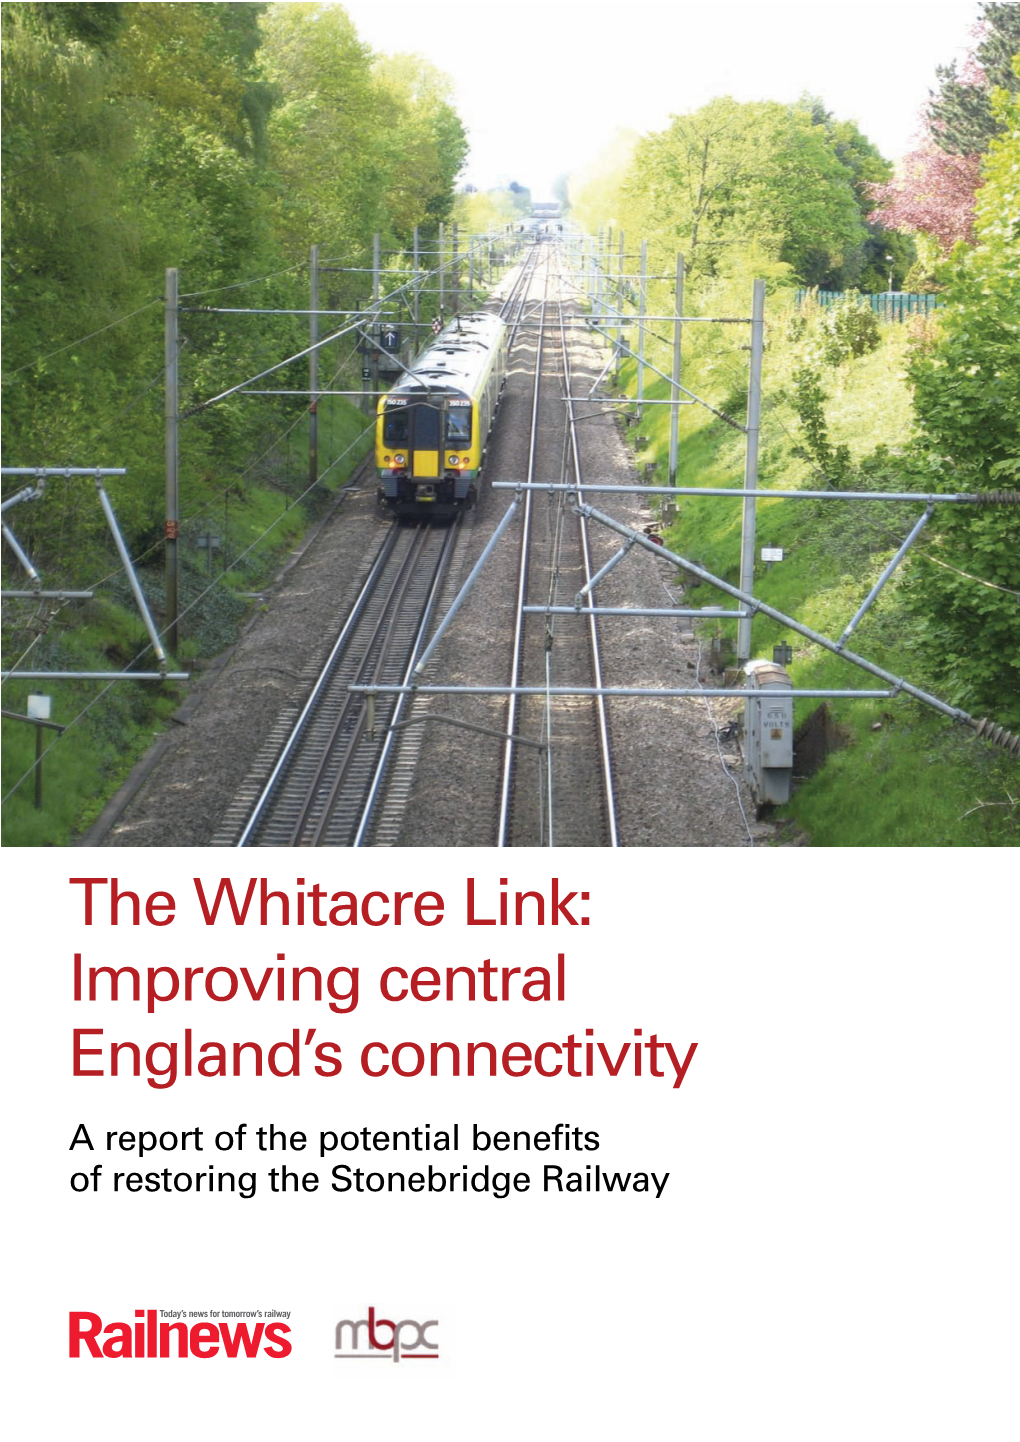 The Whitacre Link: Improving Central England’S Connectivity a Report of the Potential Benefits of Restoring the Stonebridge Railway June 2013